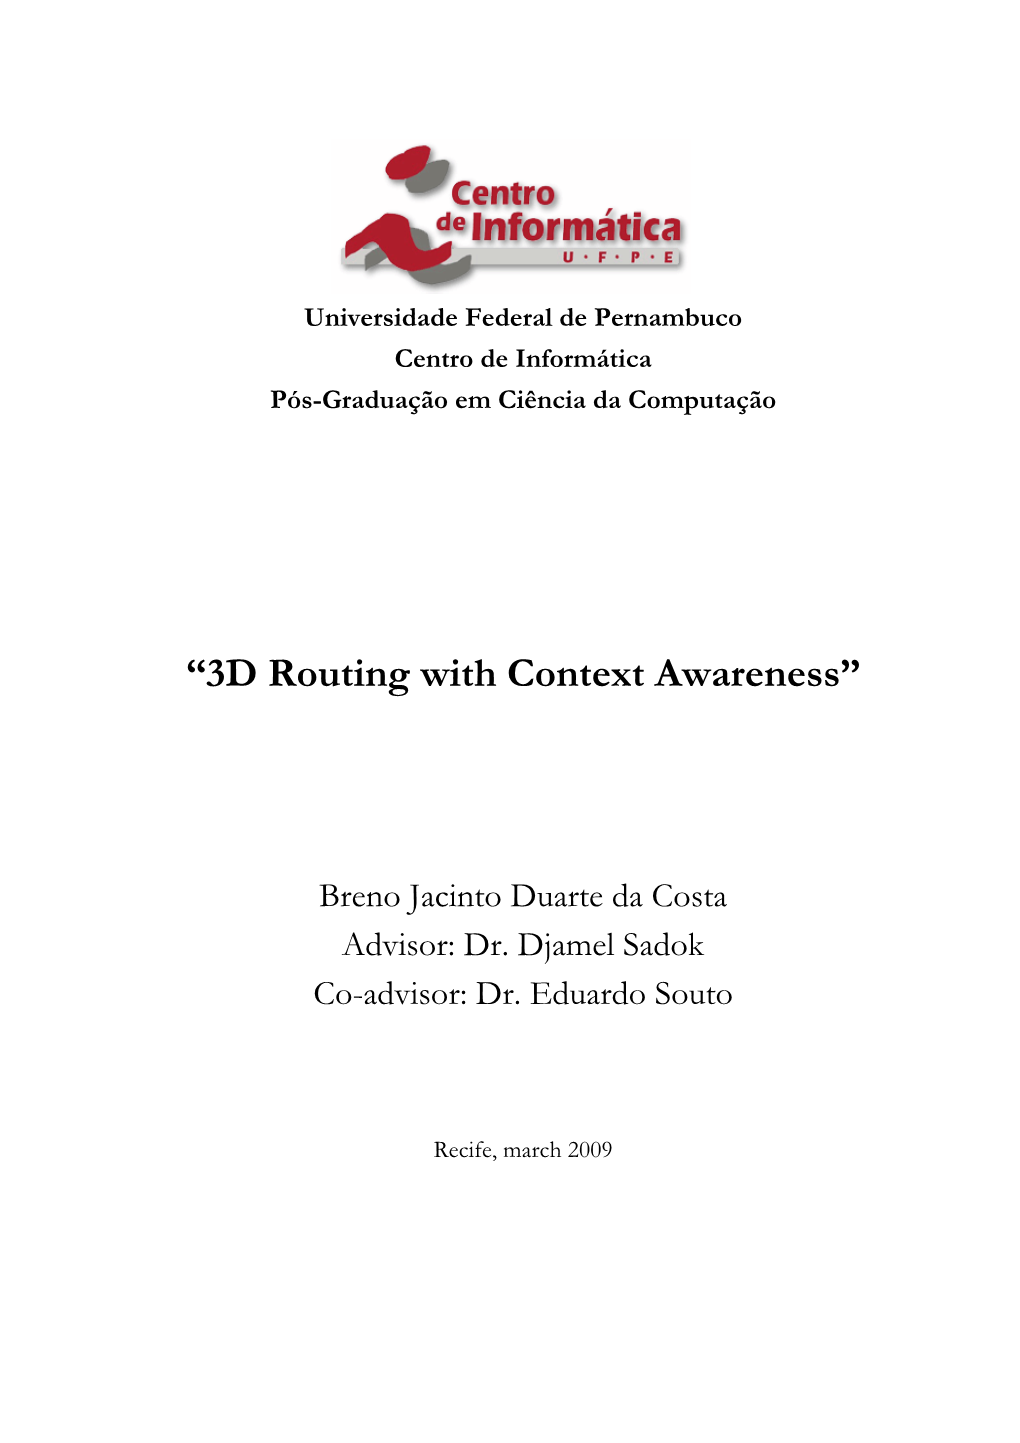 “3D Routing with Context Awareness”